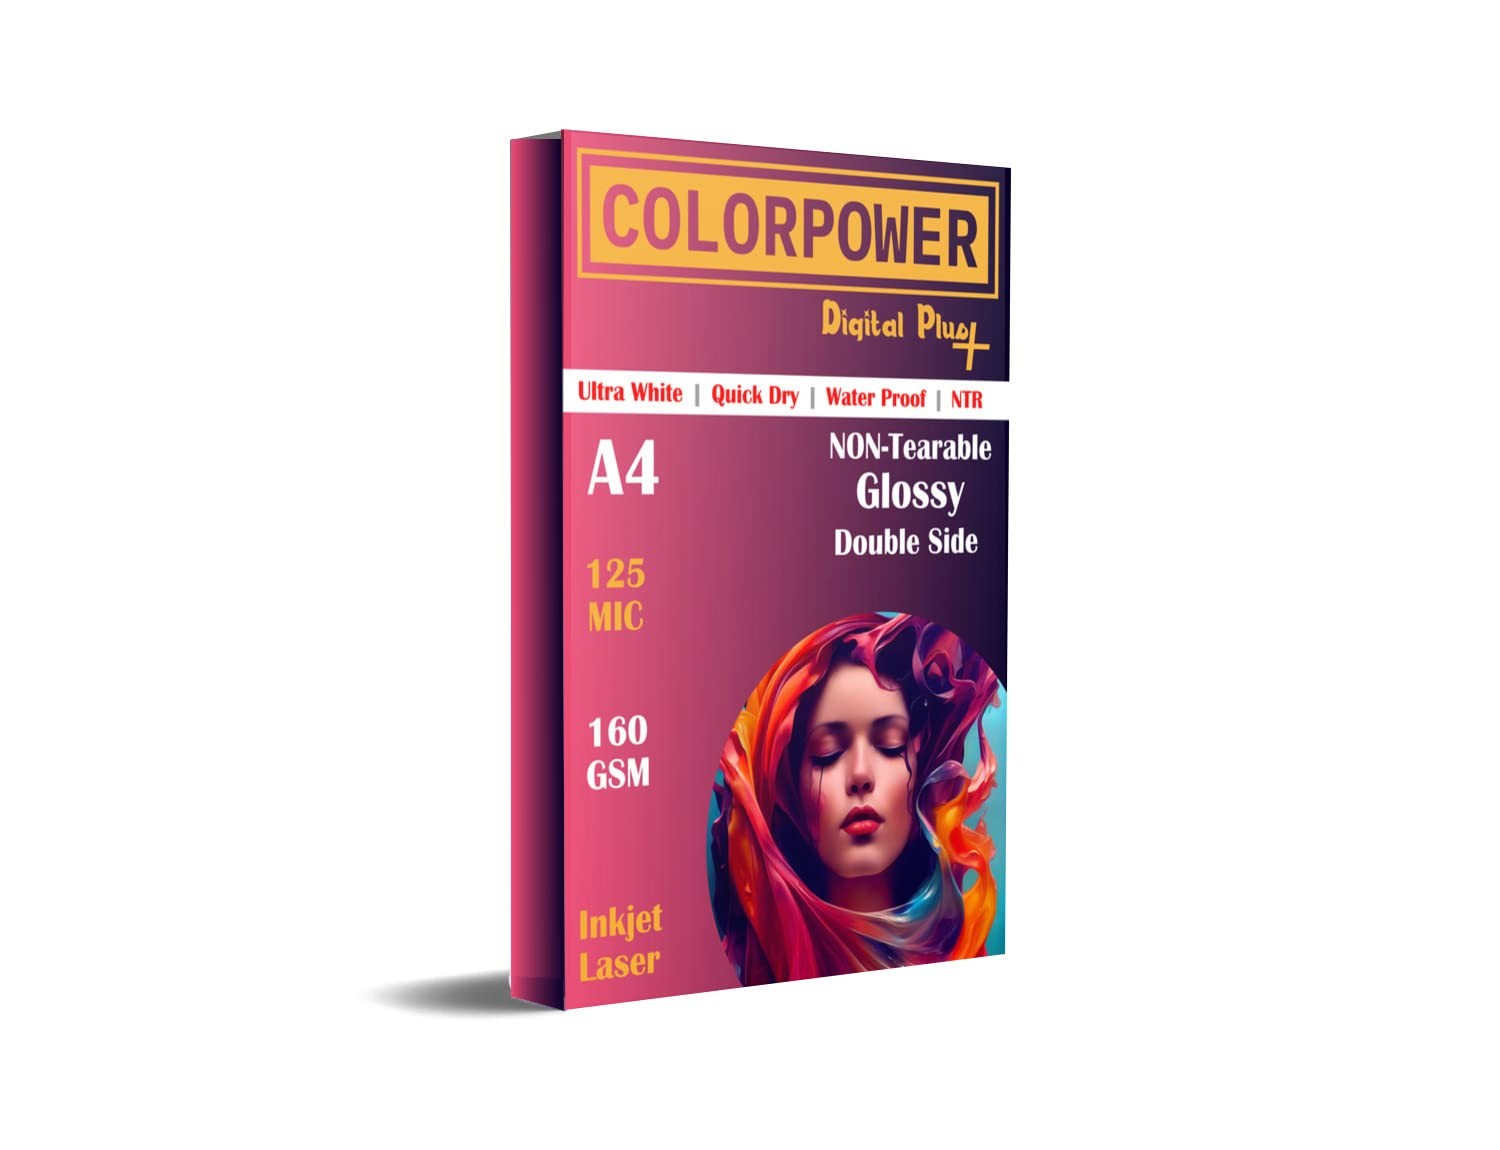 ColorPower A4 Photo Glossy Non-Tearable Paper Ntr (Both Side Coated/Printable) 125 Microns / 160 Gsm For Digital, Inkjet And Laserjet (Pack of 25Pcs)